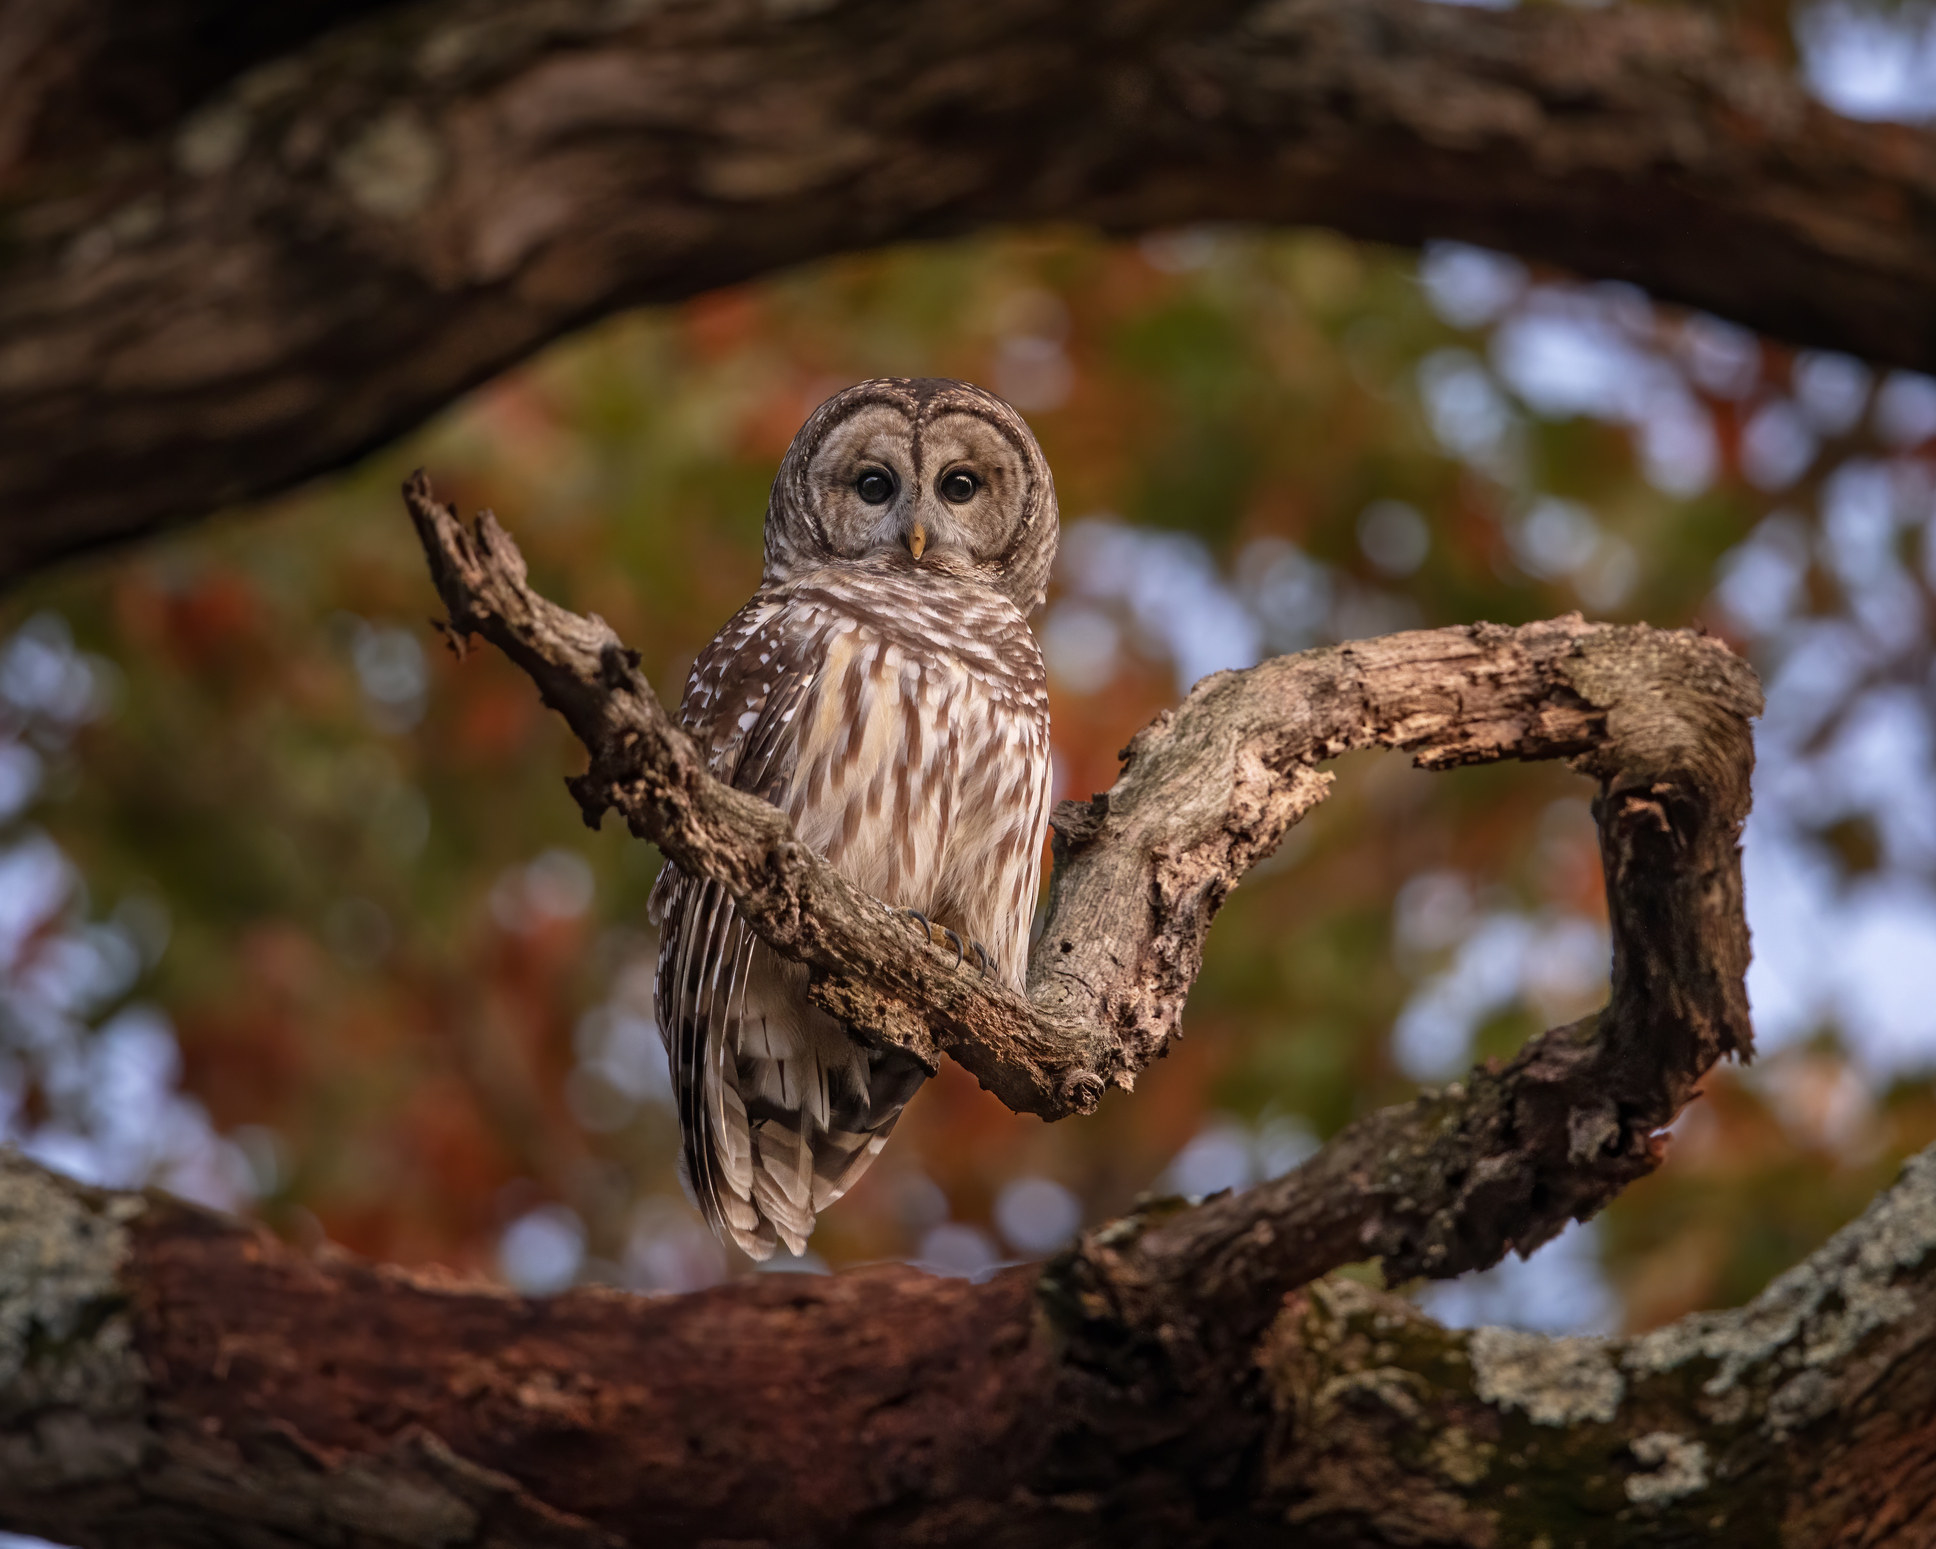 An owl perched on a tree